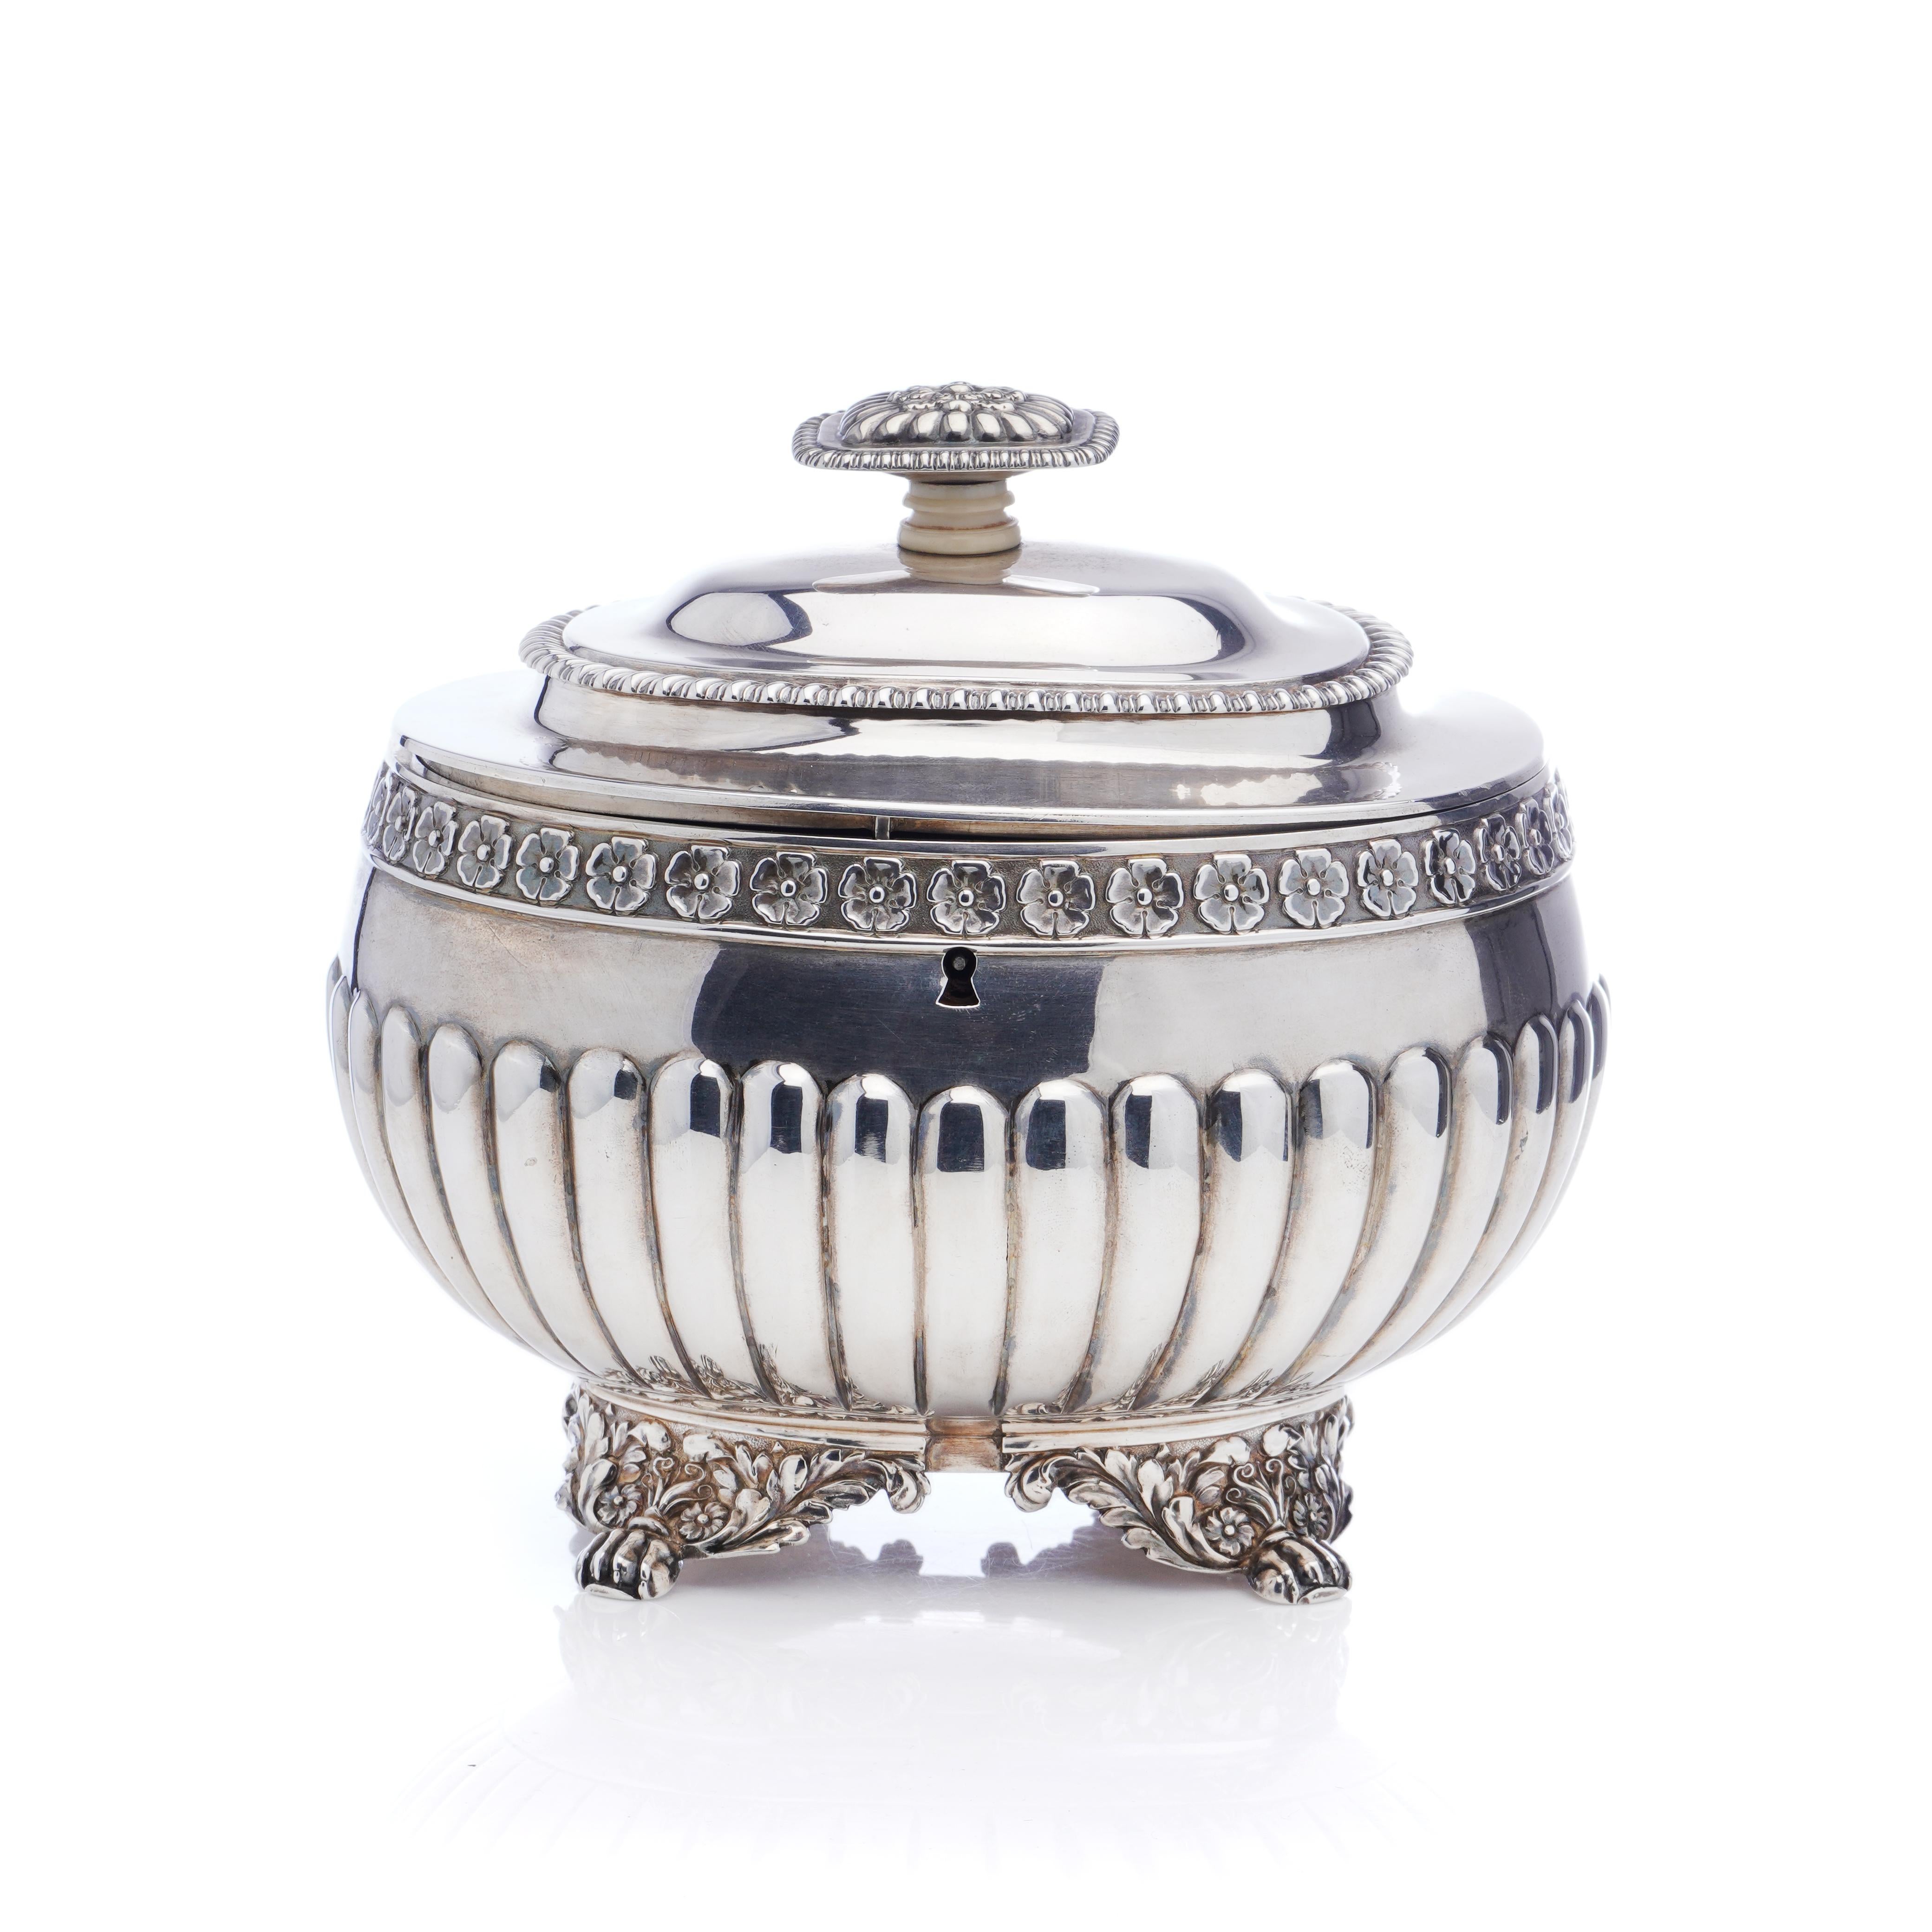 Georgian silver tea caddy.
Made in England London 1781
Maker: Joseph Craddock & William Ker Reid
Fully hallmarked.

Dimensions - 
Size: 16 x 13.5 x 15 cm
Weight: 883 grams

Condition: Pre-owned, minor signs of usage, good condition